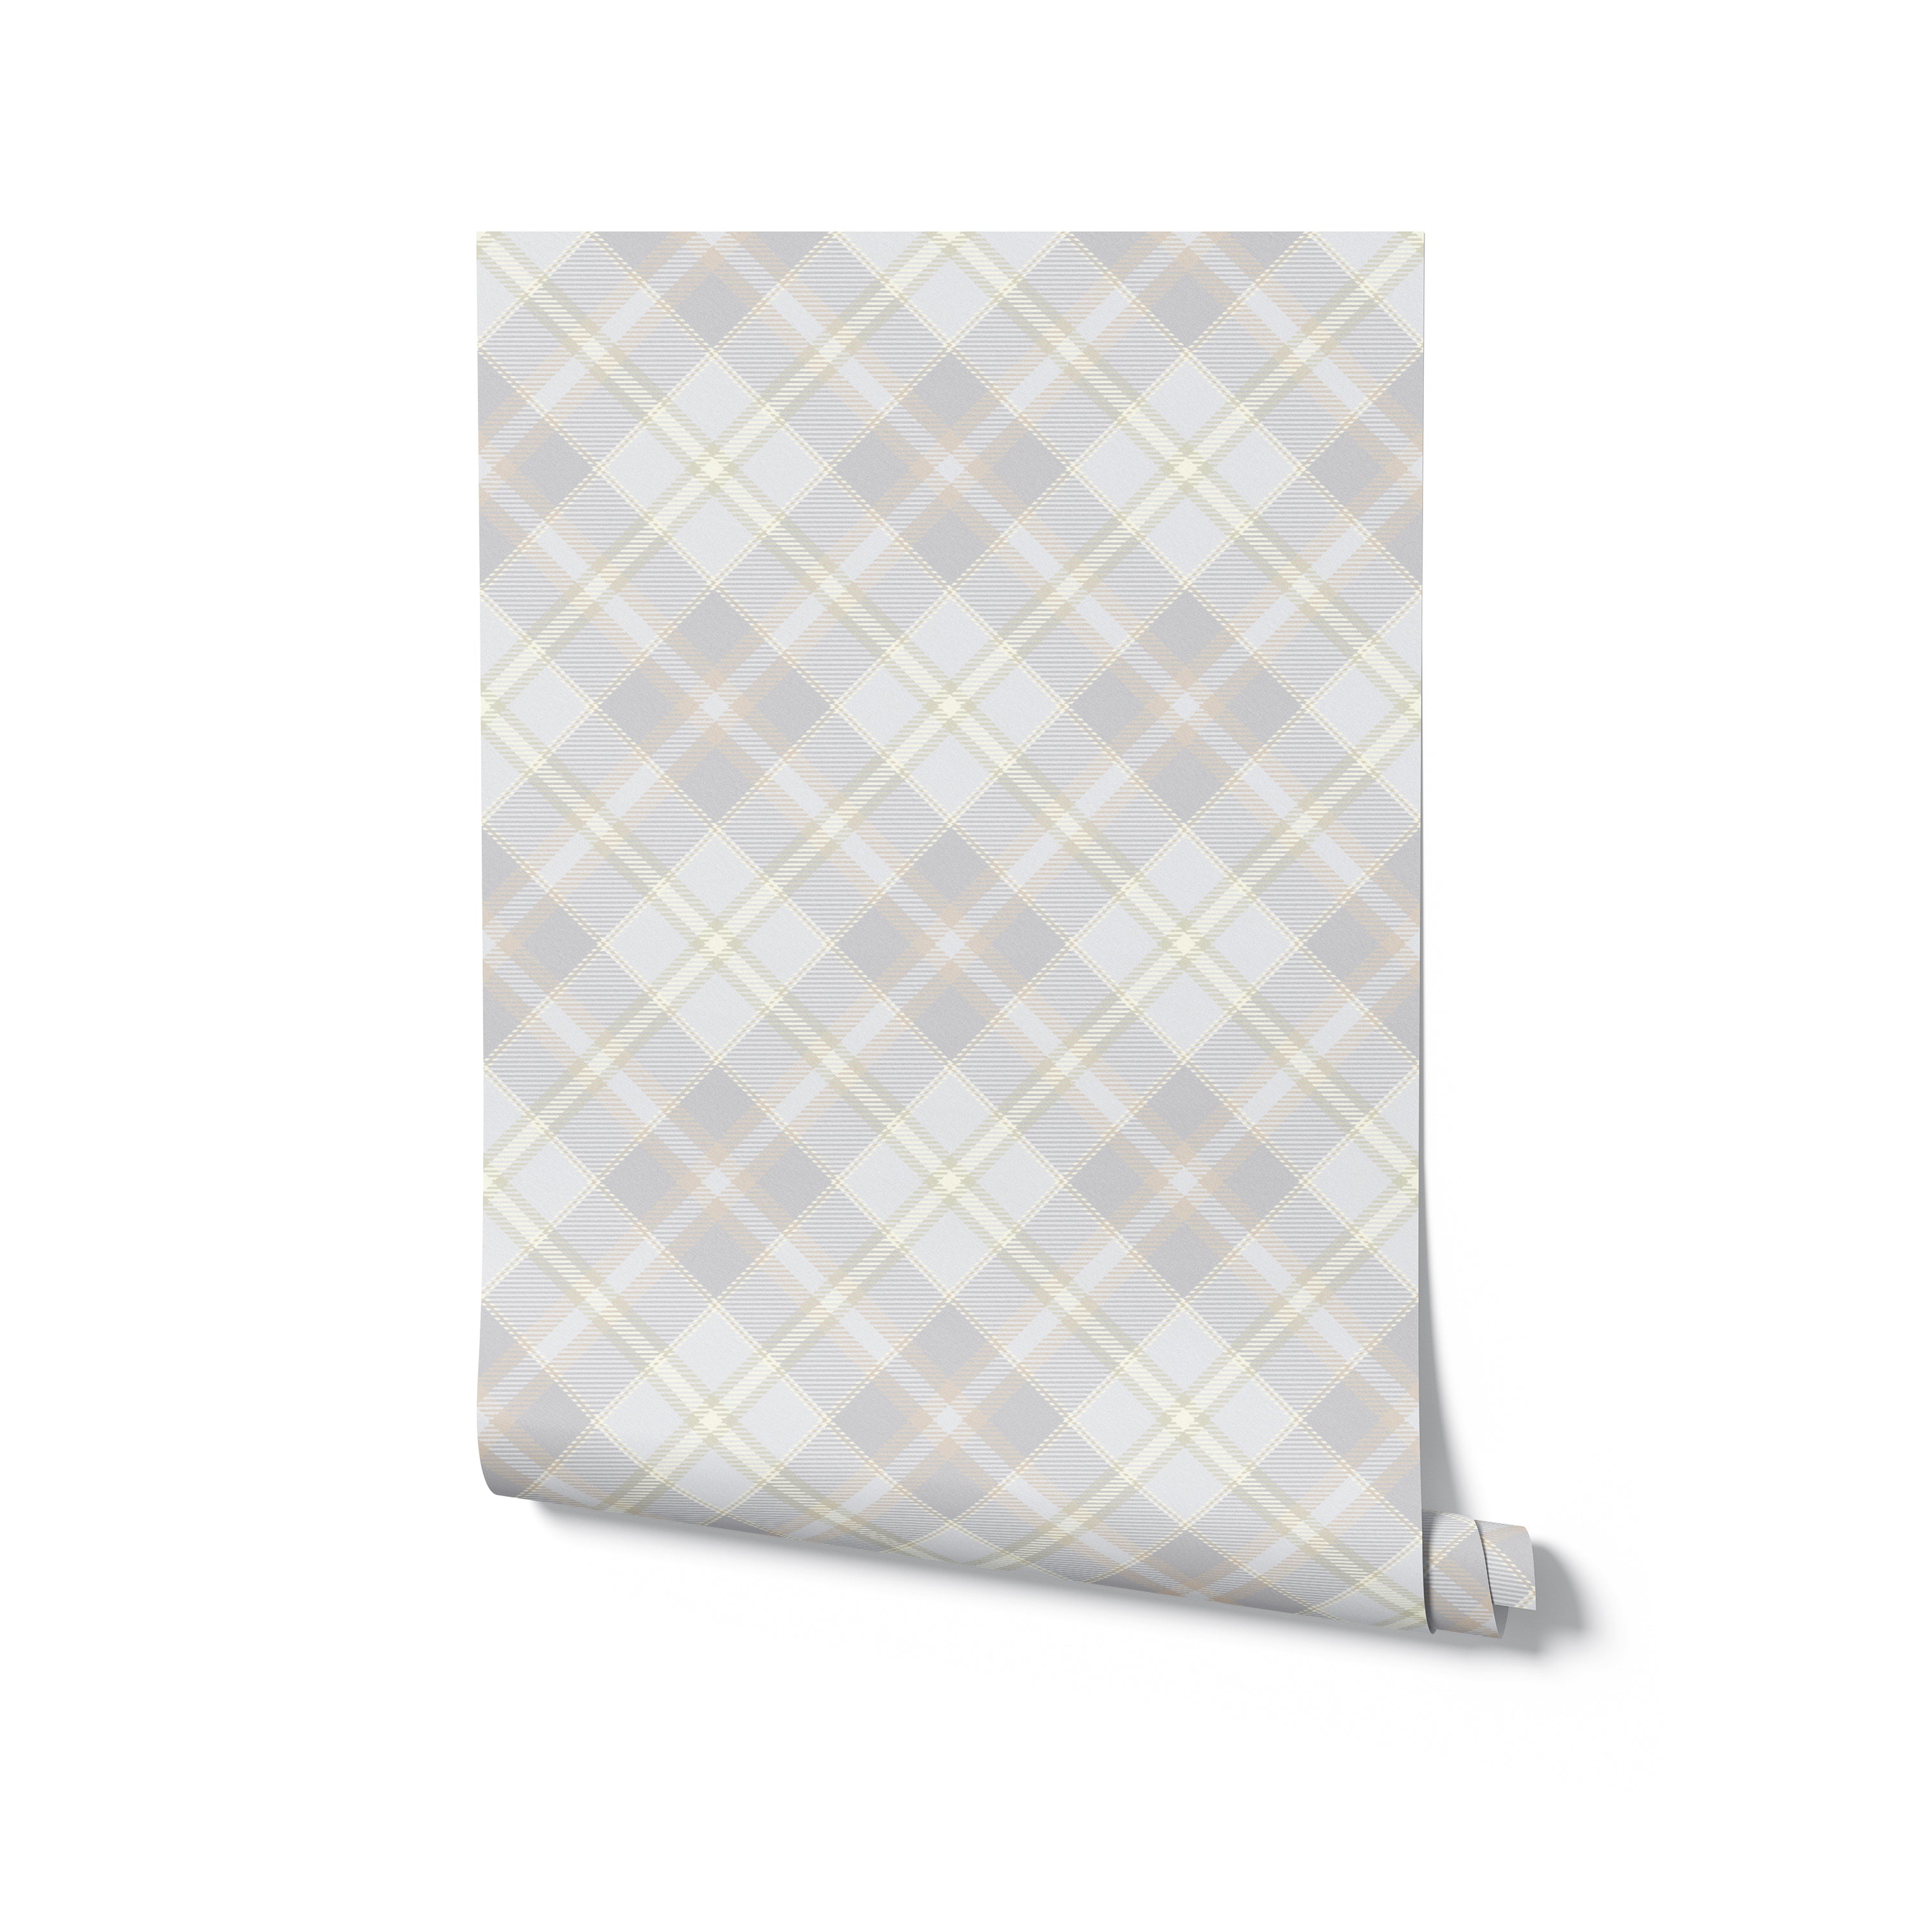 A roll of Misty Tartan Plaid Wallpaper showcasing the intricate crisscross design in muted gray and beige shades. The pattern is perfect for adding a subtle yet stylish touch to any room, blending well with various decor themes.